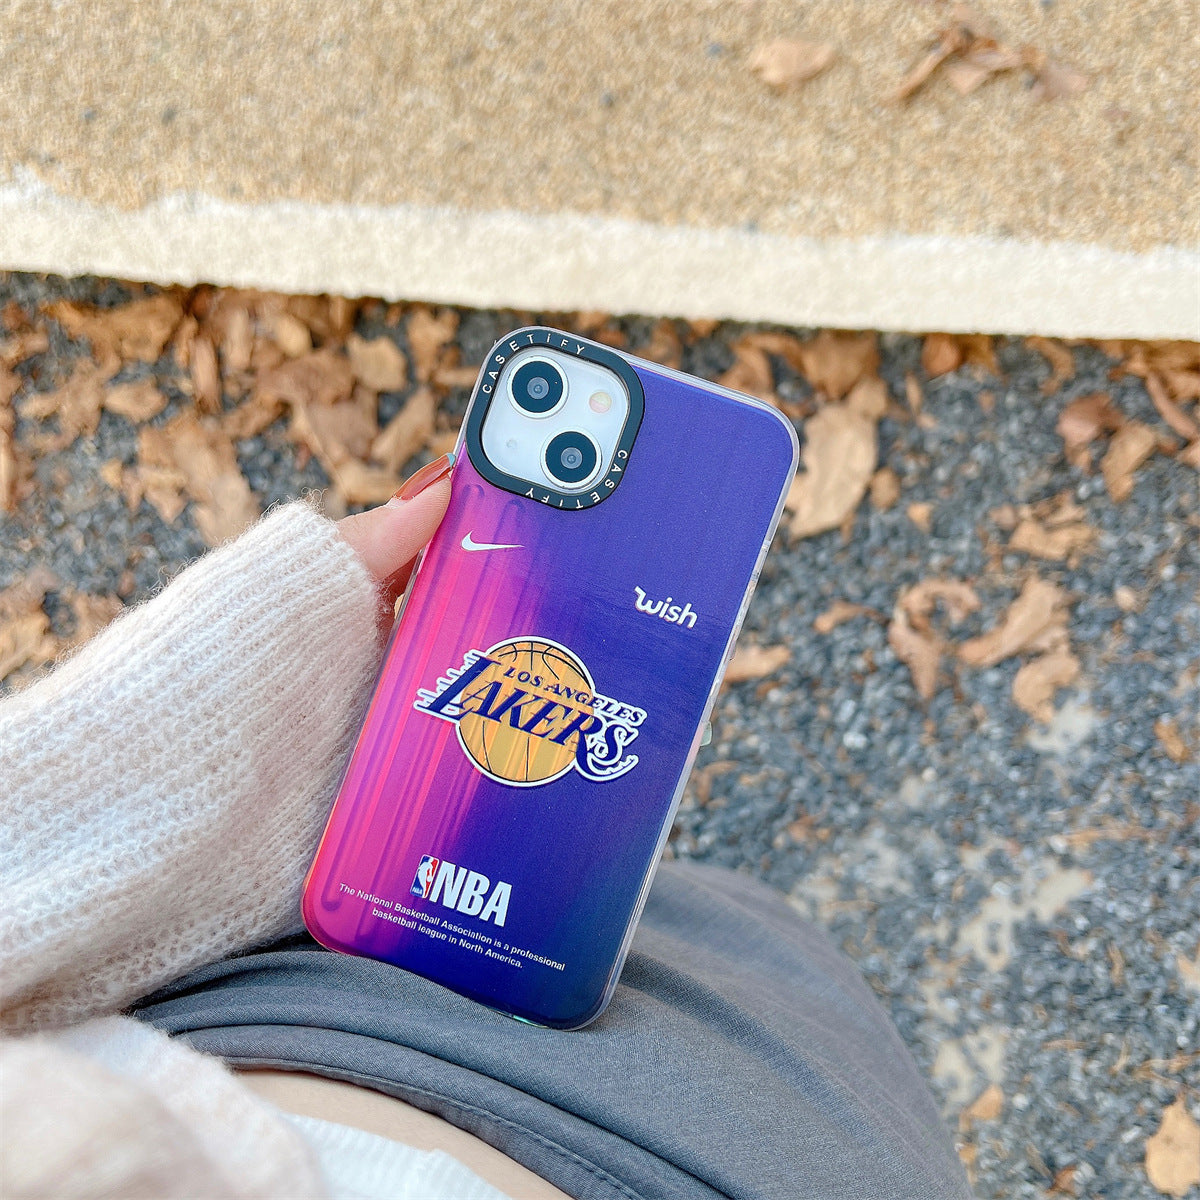 NBA-Lakers iPhone Case